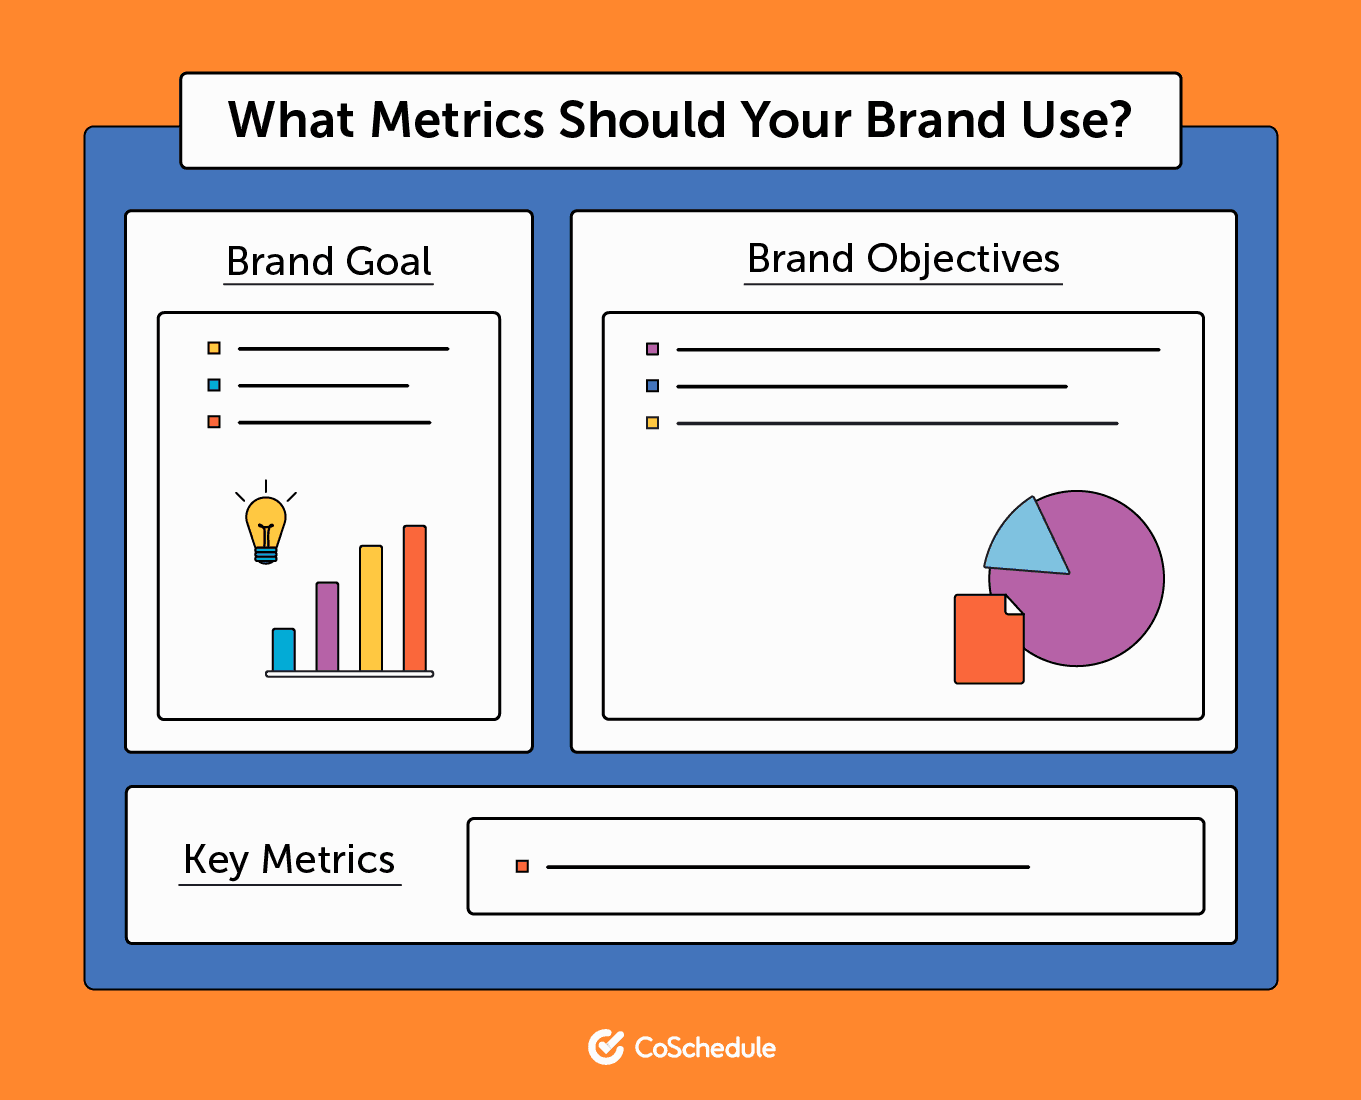 What metrics should your brand use?